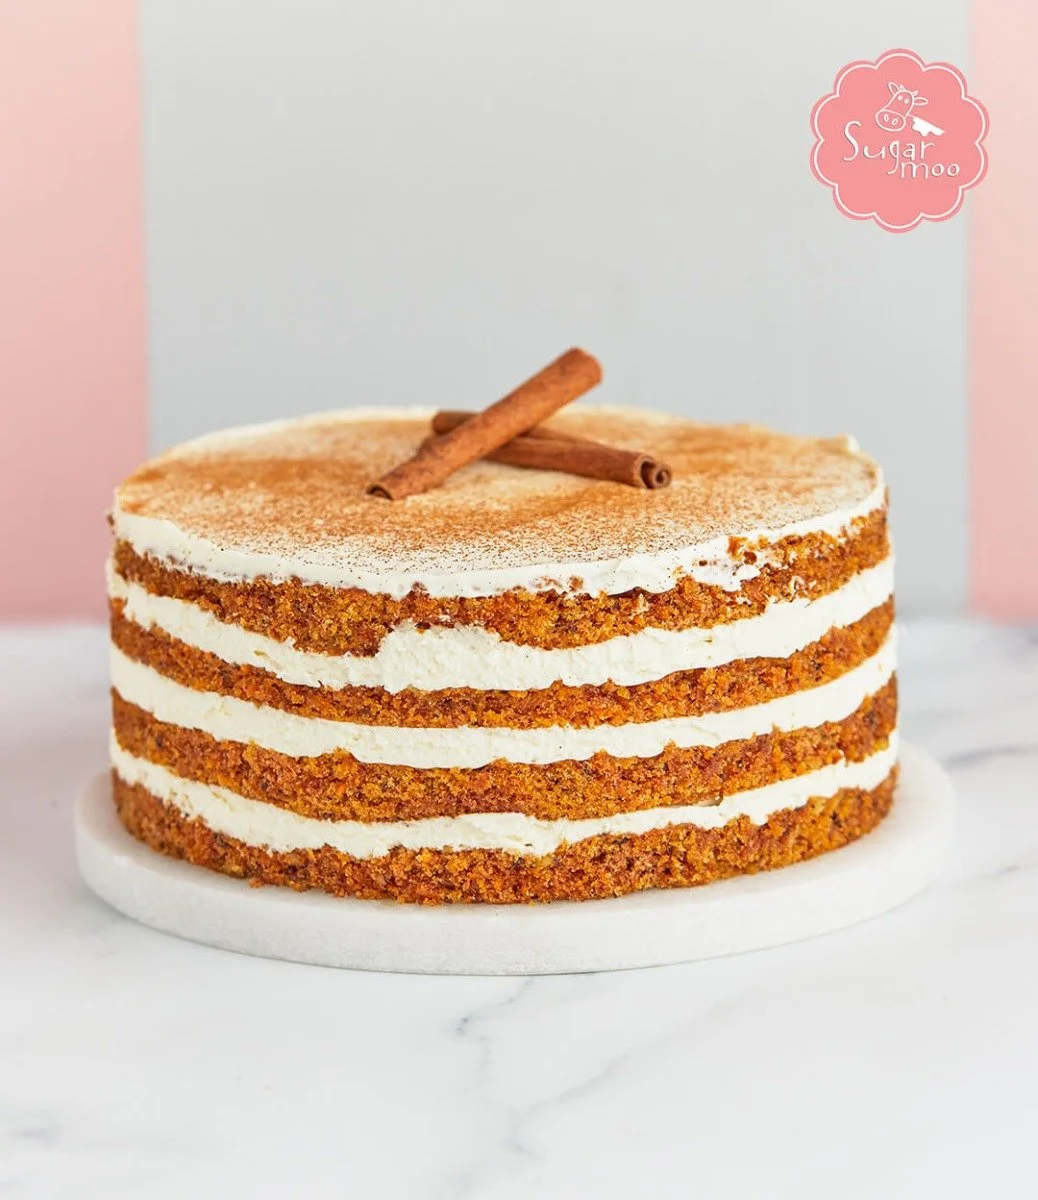 Twisted Carrot Cake by SugarMoo Desserts 